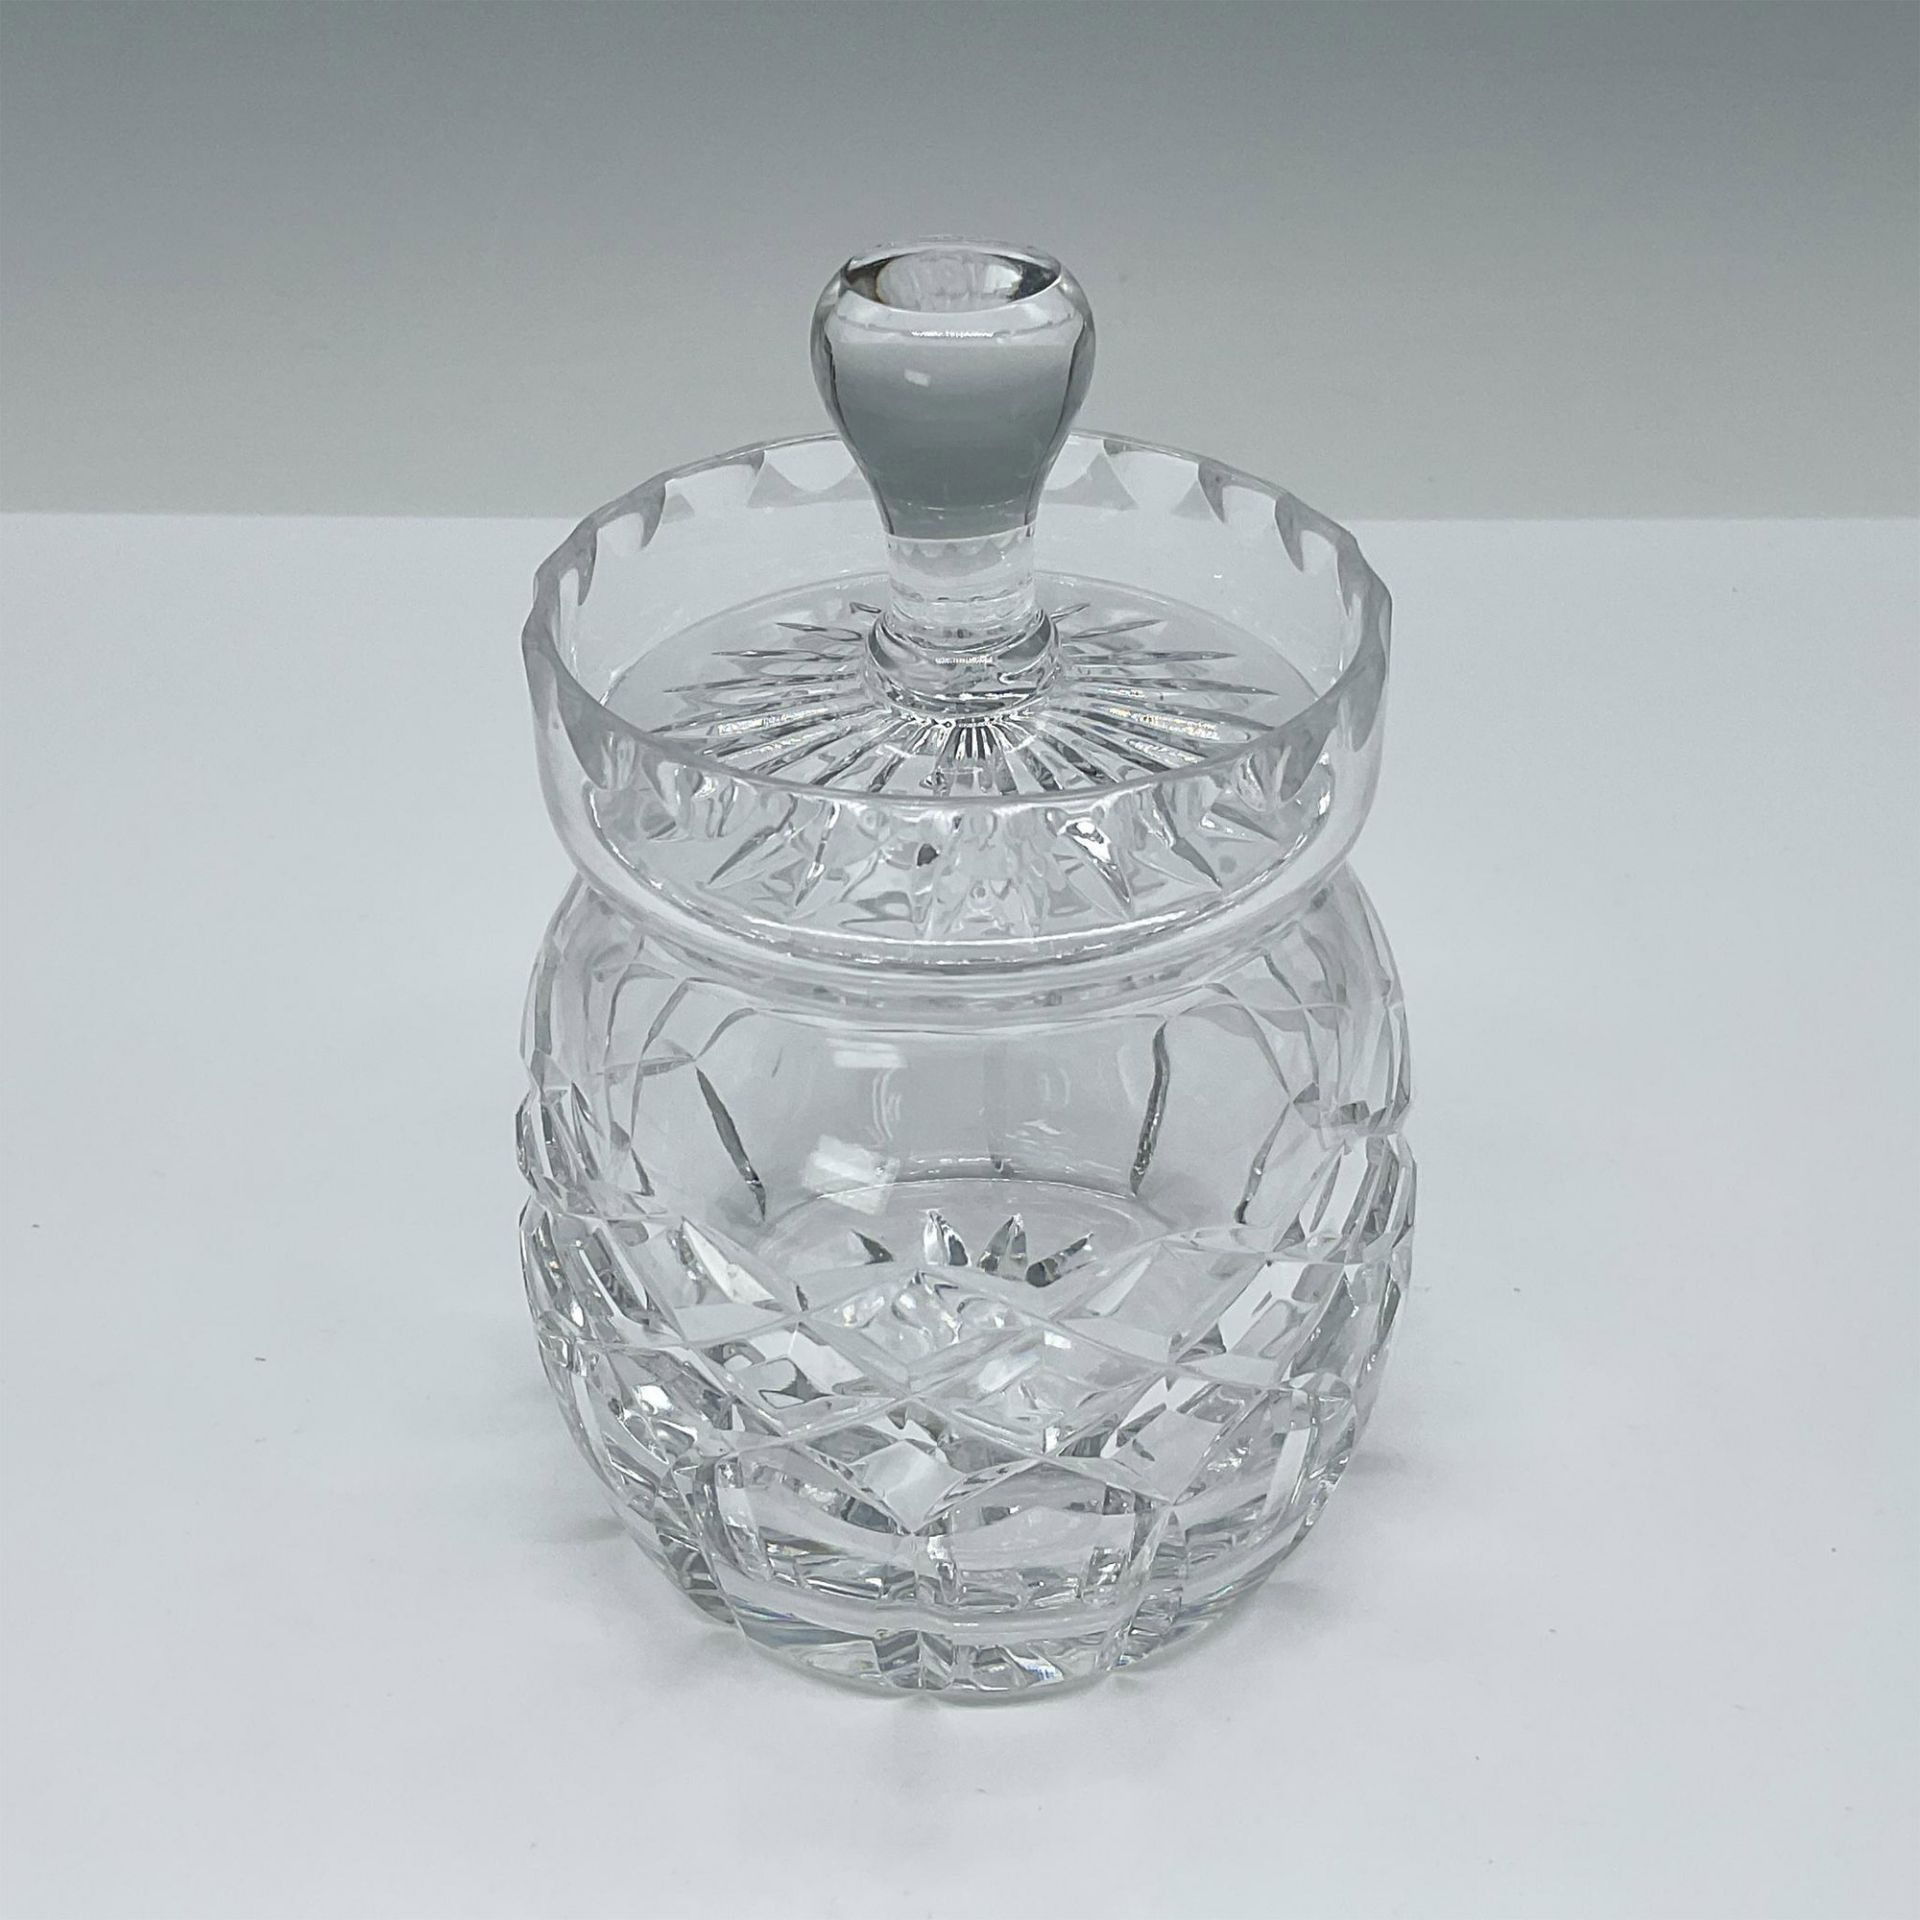 Cartier Crystal Biscuit Jar and Lid - Image 2 of 3